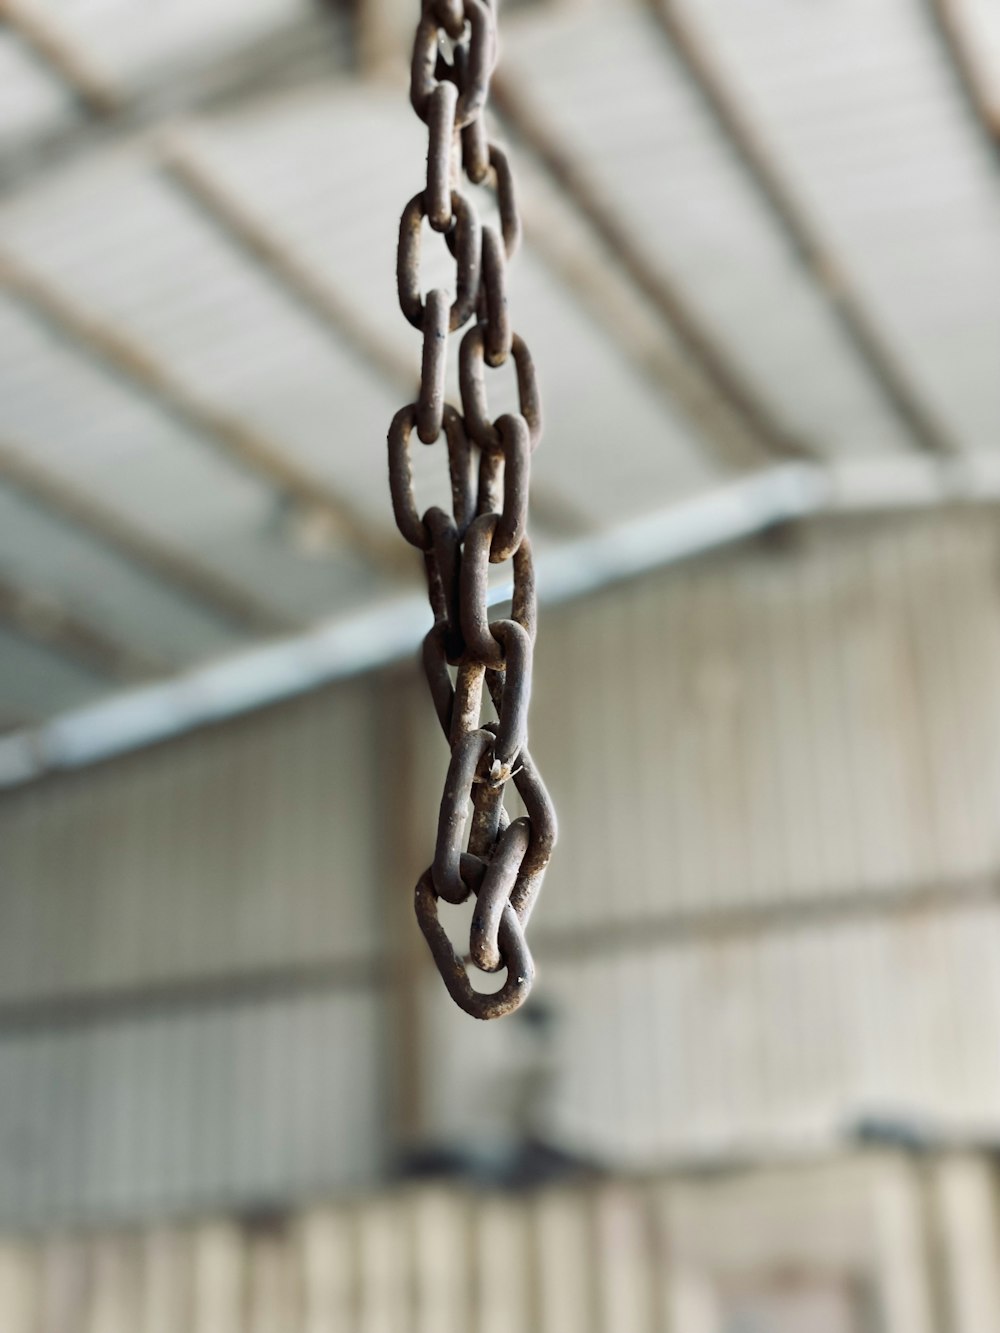 a chain hanging from a ceiling in a building